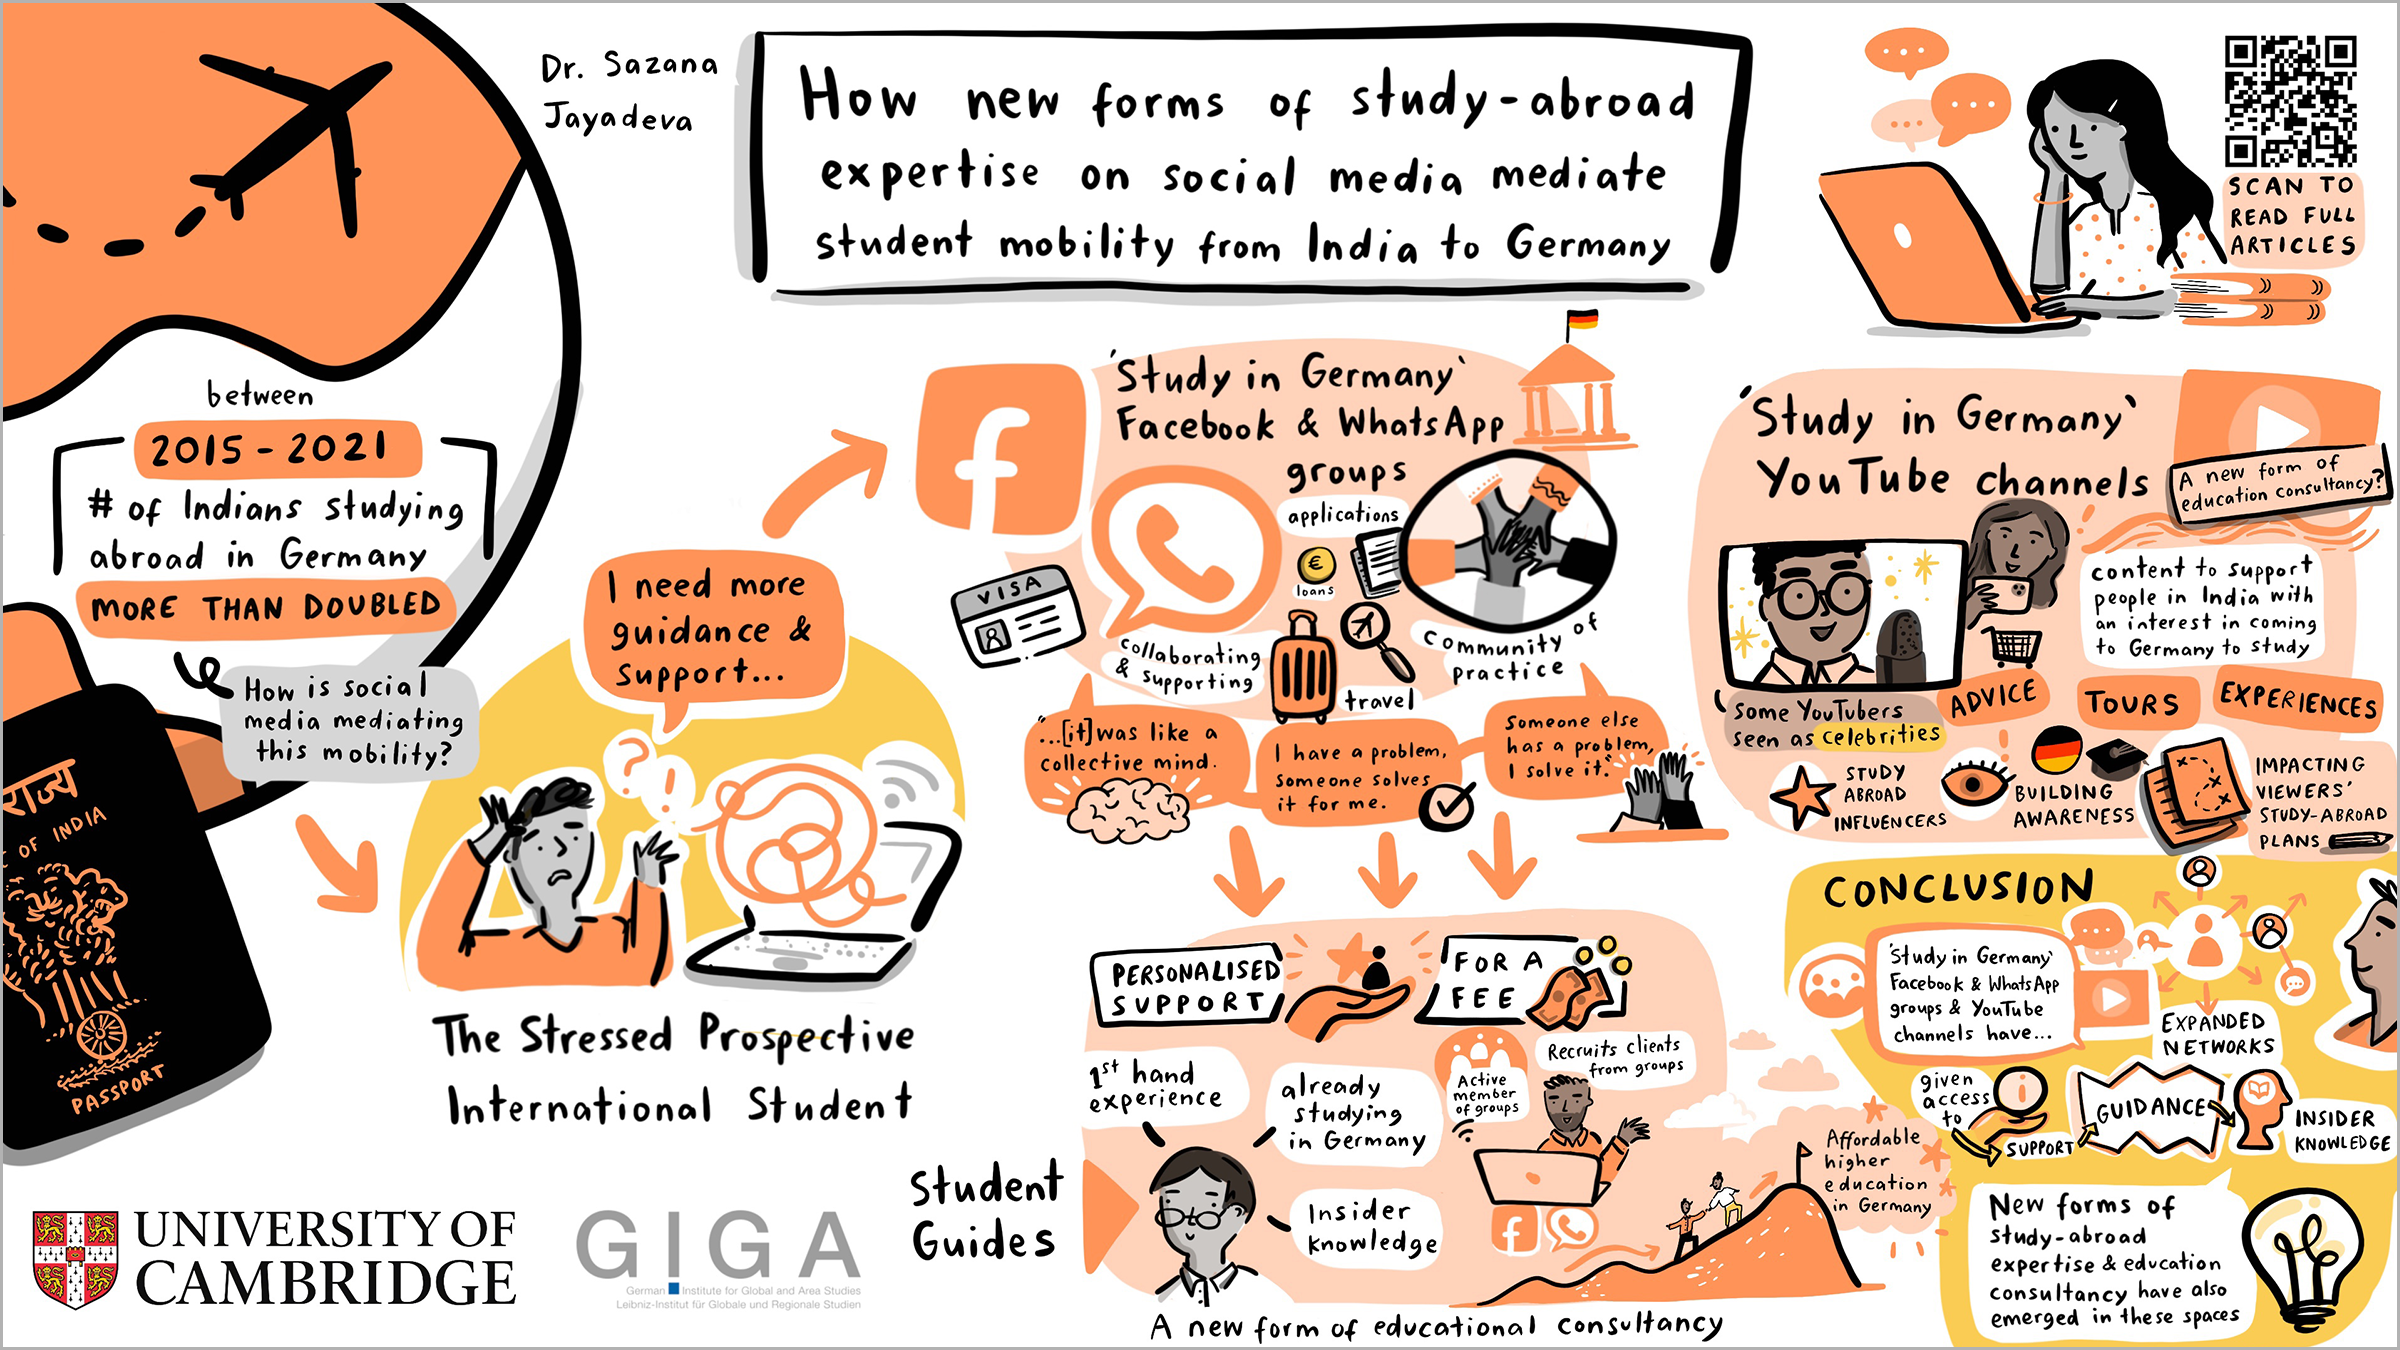 Graphic recording on the paper "How new forms of study-abroad expertise on social media mediate student mobility from India to Germany."